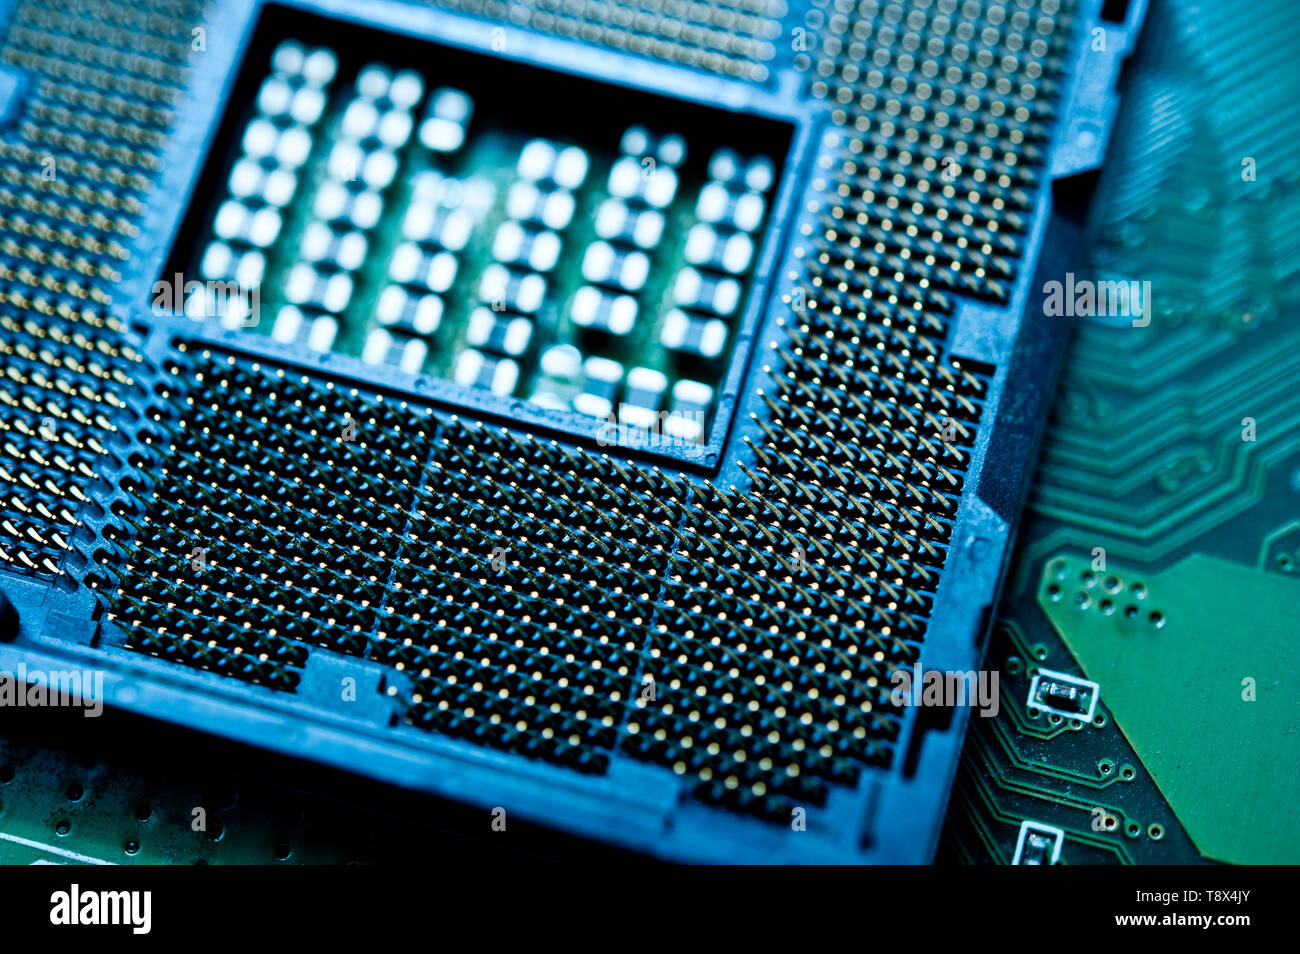 macro detail of a computer CPU or central processing unit Stock Photo